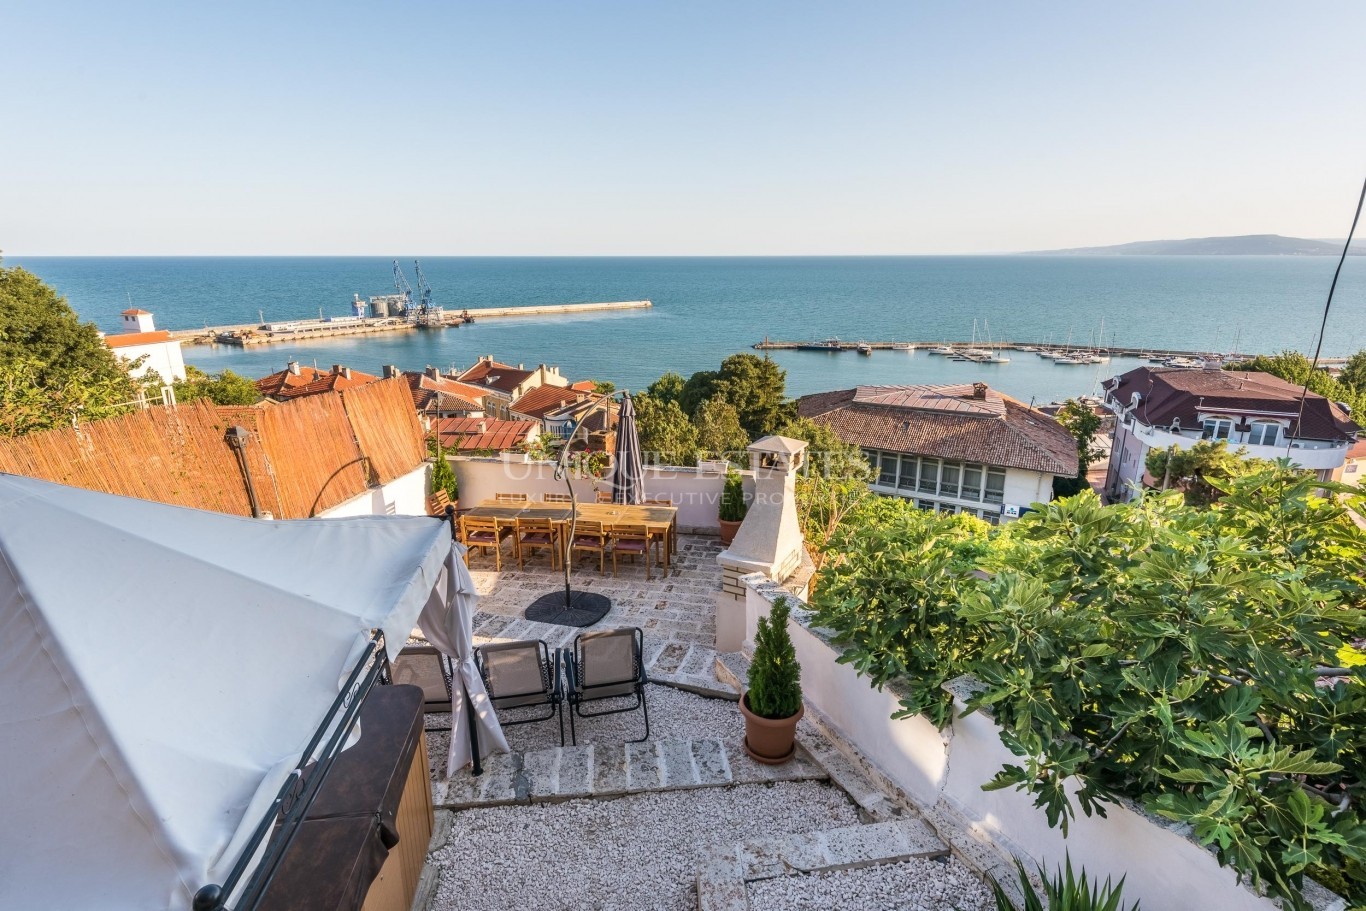 House for sale in Balchik,  with listing ID: K7773 - image 4